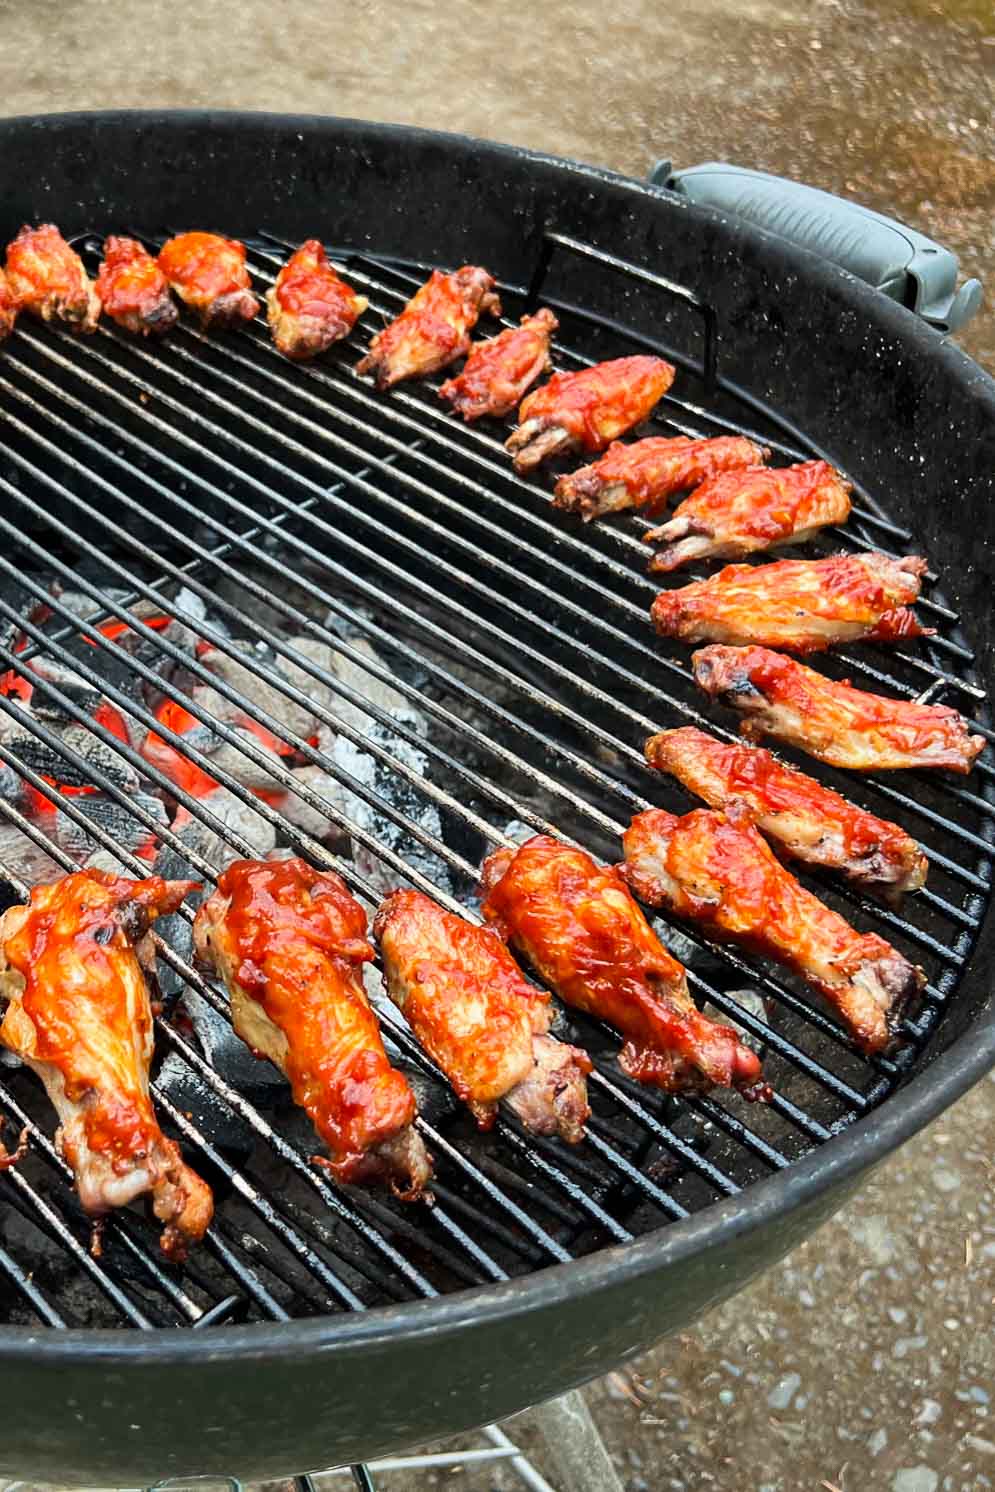 Bourbon barbecue chicken wings on the grill, recipe inspired by Mammoth Cave